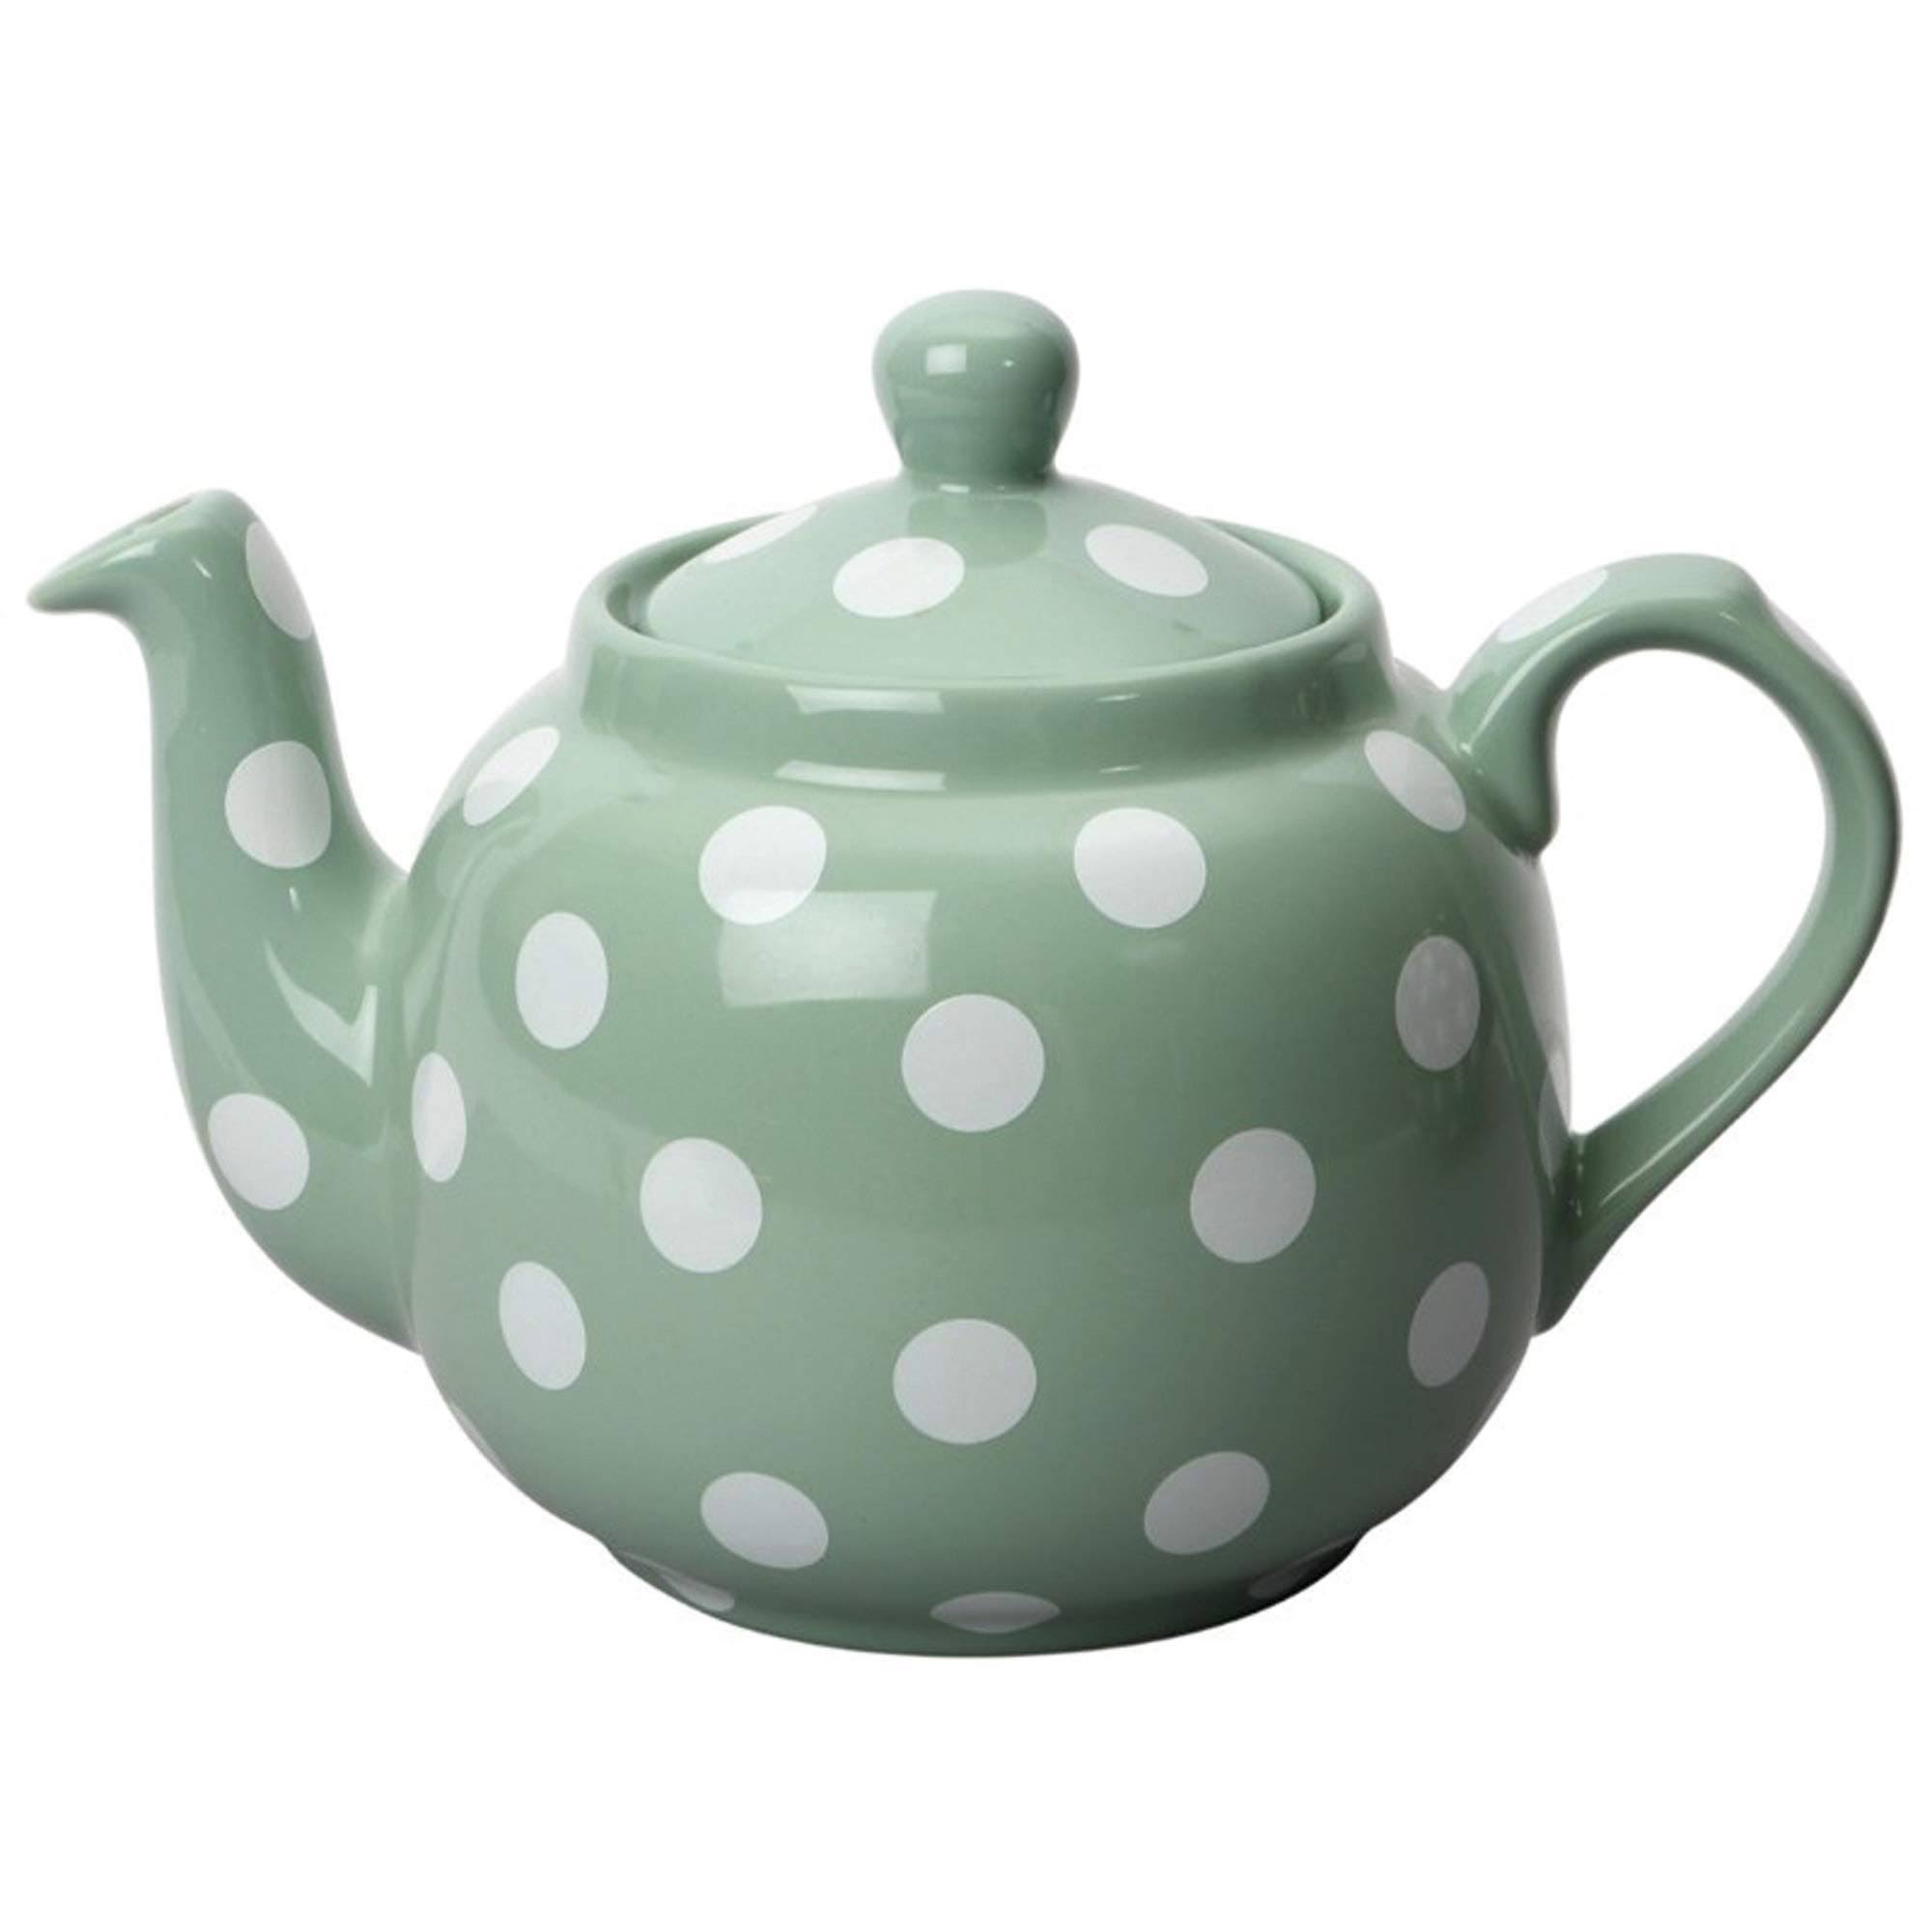 London Pottery 4 Cup Farmhouse Filter Teapot Green with White Spots